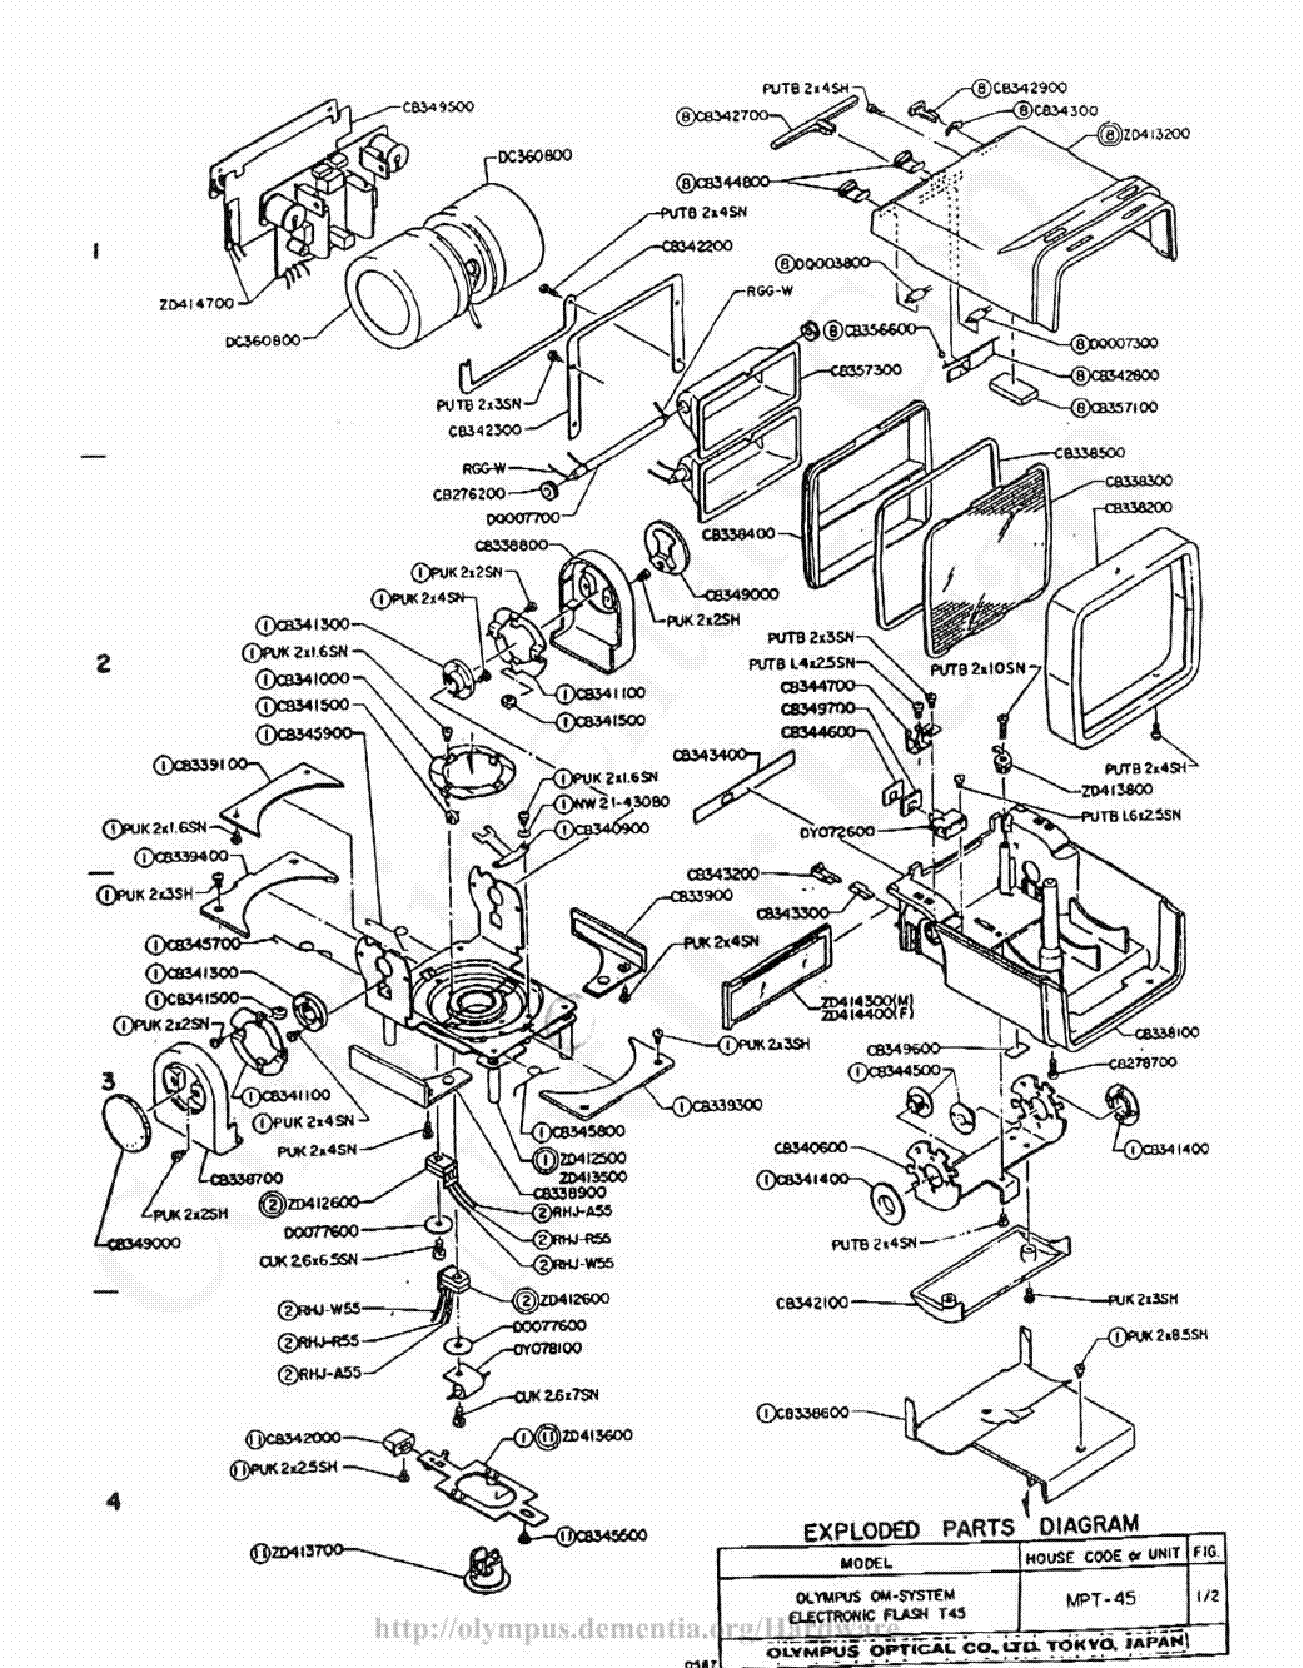 OLYMPUS T-45 EXPLODED PARTS DIAGRAM service manual (1st page)